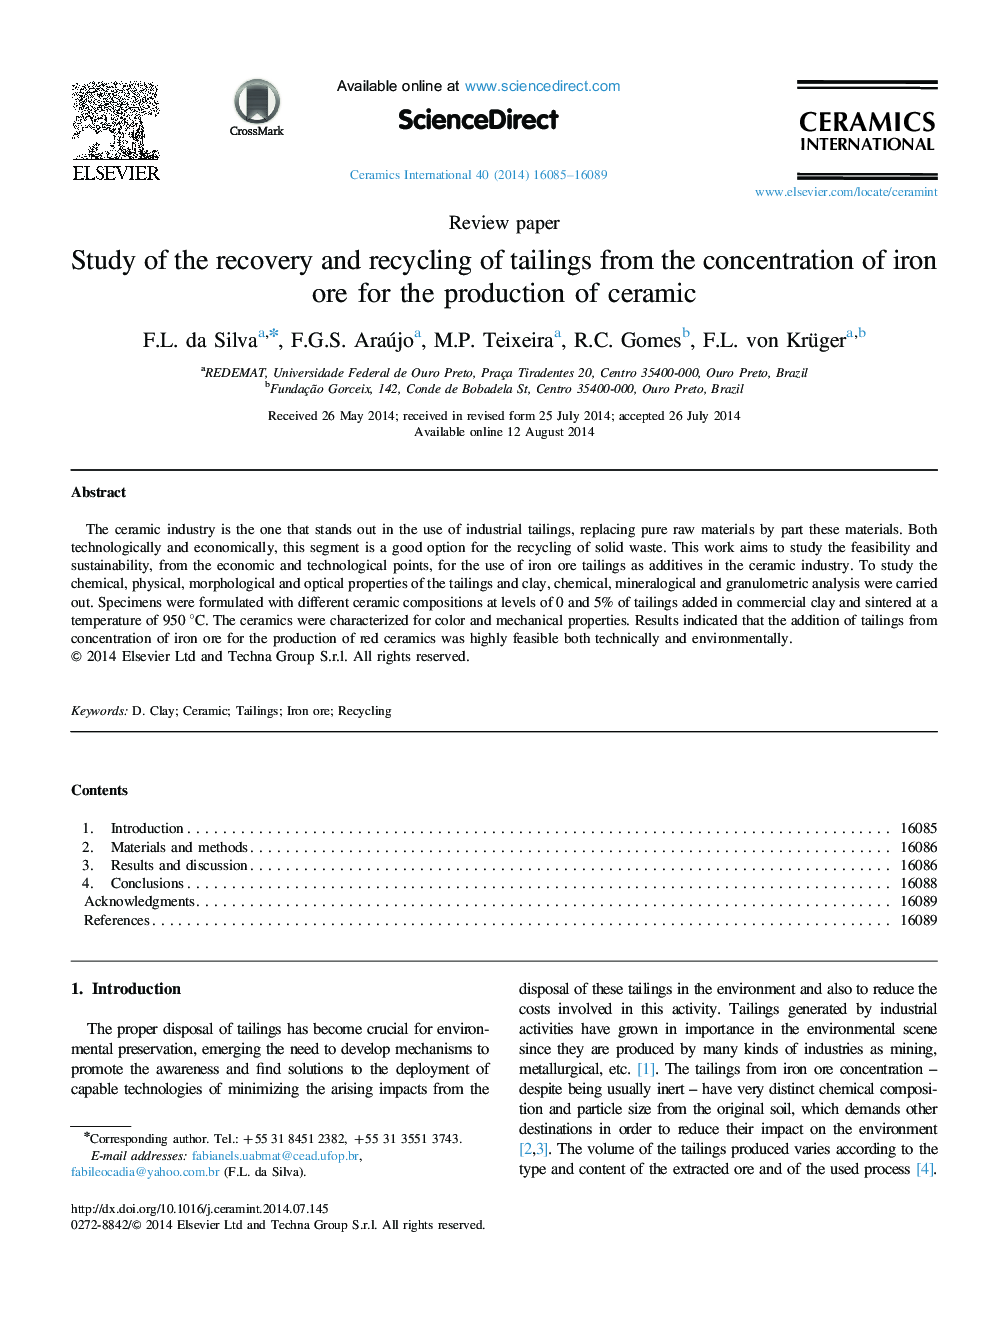 Study of the recovery and recycling of tailings from the concentration of iron ore for the production of ceramic